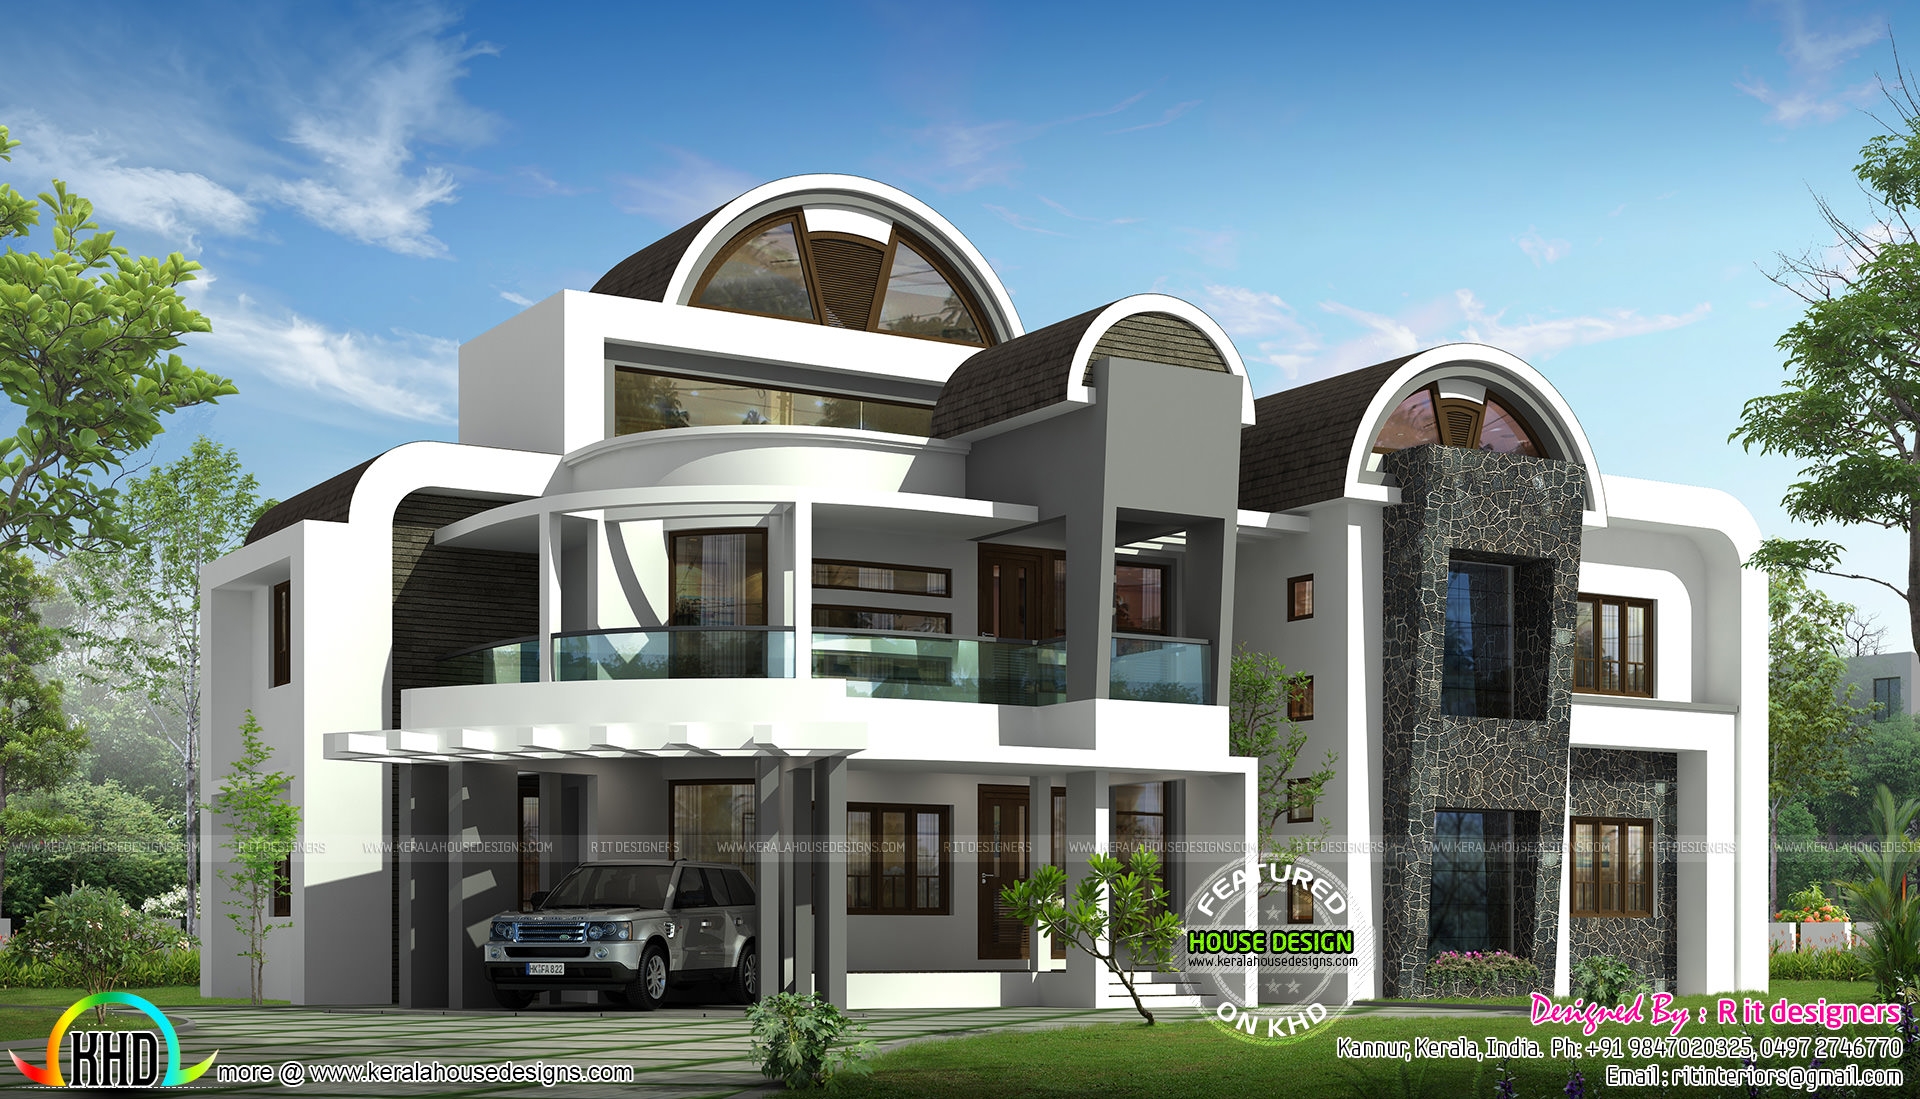 Rounded Roof Plans Modern Round Roof Mix House Plan Kerala Home ...